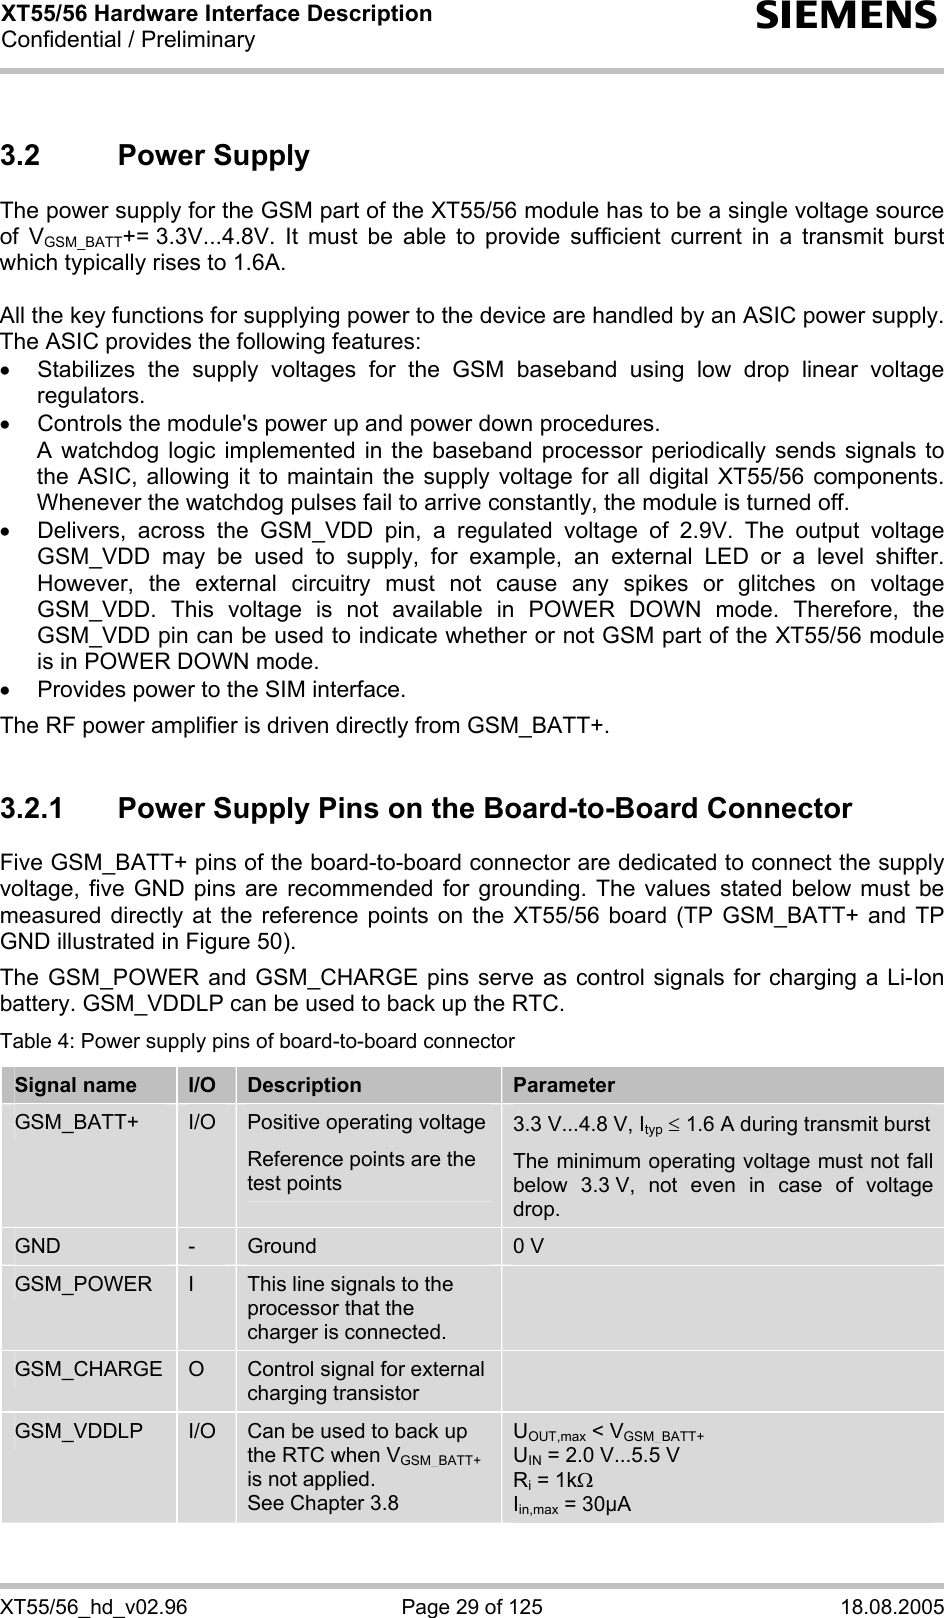 XT55/56 Hardware Interface Description Confidential / Preliminary s XT55/56_hd_v02.96  Page 29 of 125  18.08.2005 3.2 Power Supply The power supply for the GSM part of the XT55/56 module has to be a single voltage source of VGSM_BATT+= 3.3V...4.8V. It must be able to provide sufficient current in a transmit burst which typically rises to 1.6A.   All the key functions for supplying power to the device are handled by an ASIC power supply. The ASIC provides the following features: • Stabilizes the supply voltages for the GSM baseband using low drop linear voltage regulators.  •  Controls the module&apos;s power up and power down procedures.  A watchdog logic implemented in the baseband processor periodically sends signals to the ASIC, allowing it to maintain the supply voltage for all digital XT55/56 components. Whenever the watchdog pulses fail to arrive constantly, the module is turned off.  •  Delivers, across the GSM_VDD pin, a regulated voltage of 2.9V. The output voltage GSM_VDD may be used to supply, for example, an external LED or a level shifter. However, the external circuitry must not cause any spikes or glitches on voltage GSM_VDD. This voltage is not available in POWER DOWN mode. Therefore, the GSM_VDD pin can be used to indicate whether or not GSM part of the XT55/56 module is in POWER DOWN mode. •  Provides power to the SIM interface.  The RF power amplifier is driven directly from GSM_BATT+.  3.2.1  Power Supply Pins on the Board-to-Board Connector Five GSM_BATT+ pins of the board-to-board connector are dedicated to connect the supply voltage, five GND pins are recommended for grounding. The values stated below must be measured directly at the reference points on the XT55/56 board (TP GSM_BATT+ and TP GND illustrated in Figure 50).  The GSM_POWER and GSM_CHARGE pins serve as control signals for charging a Li-Ion battery. GSM_VDDLP can be used to back up the RTC.  Table 4: Power supply pins of board-to-board connector Signal name  I/O  Description  Parameter GSM_BATT+  I/O  Positive operating voltage Reference points are the test points  3.3 V...4.8 V, Ityp ≤ 1.6 A during transmit burst The minimum operating voltage must not fall below 3.3 V, not even in case of voltage drop. GND  -  Ground  0 V GSM_POWER  I  This line signals to the processor that the charger is connected.  GSM_CHARGE  O  Control signal for external charging transistor  GSM_VDDLP  I/O  Can be used to back up the RTC when VGSM_BATT+ is not applied.  See Chapter 3.8 UOUT,max &lt; VGSM_BATT+ UIN = 2.0 V...5.5 V Ri = 1kΩ Iin,max = 30µA  